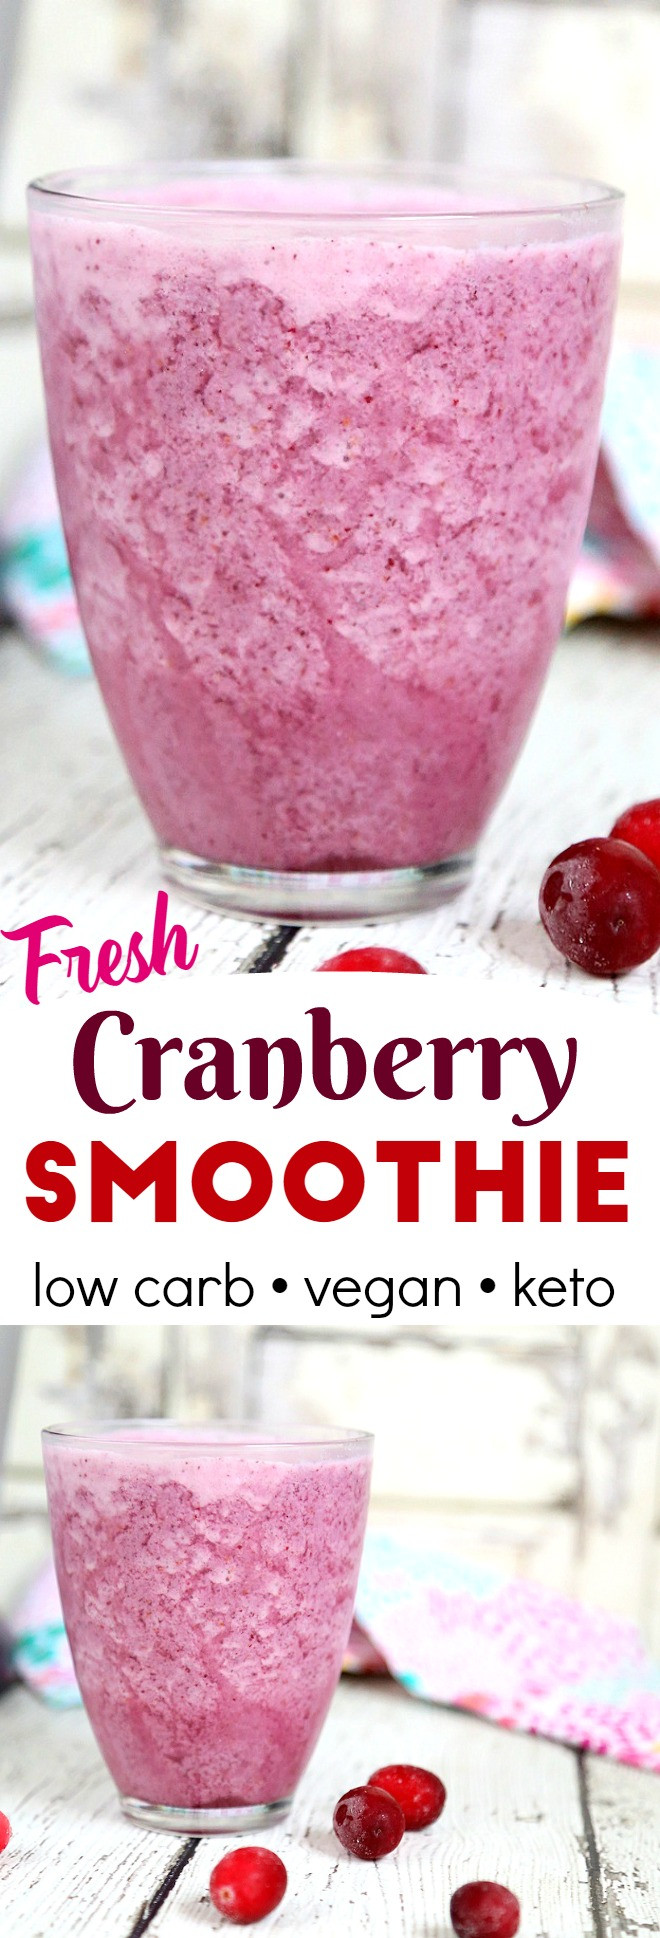 Low Carb Low Calorie Smoothies
 Fresh Cranberry Smoothie Recipe Low Carb Keto Smoothie